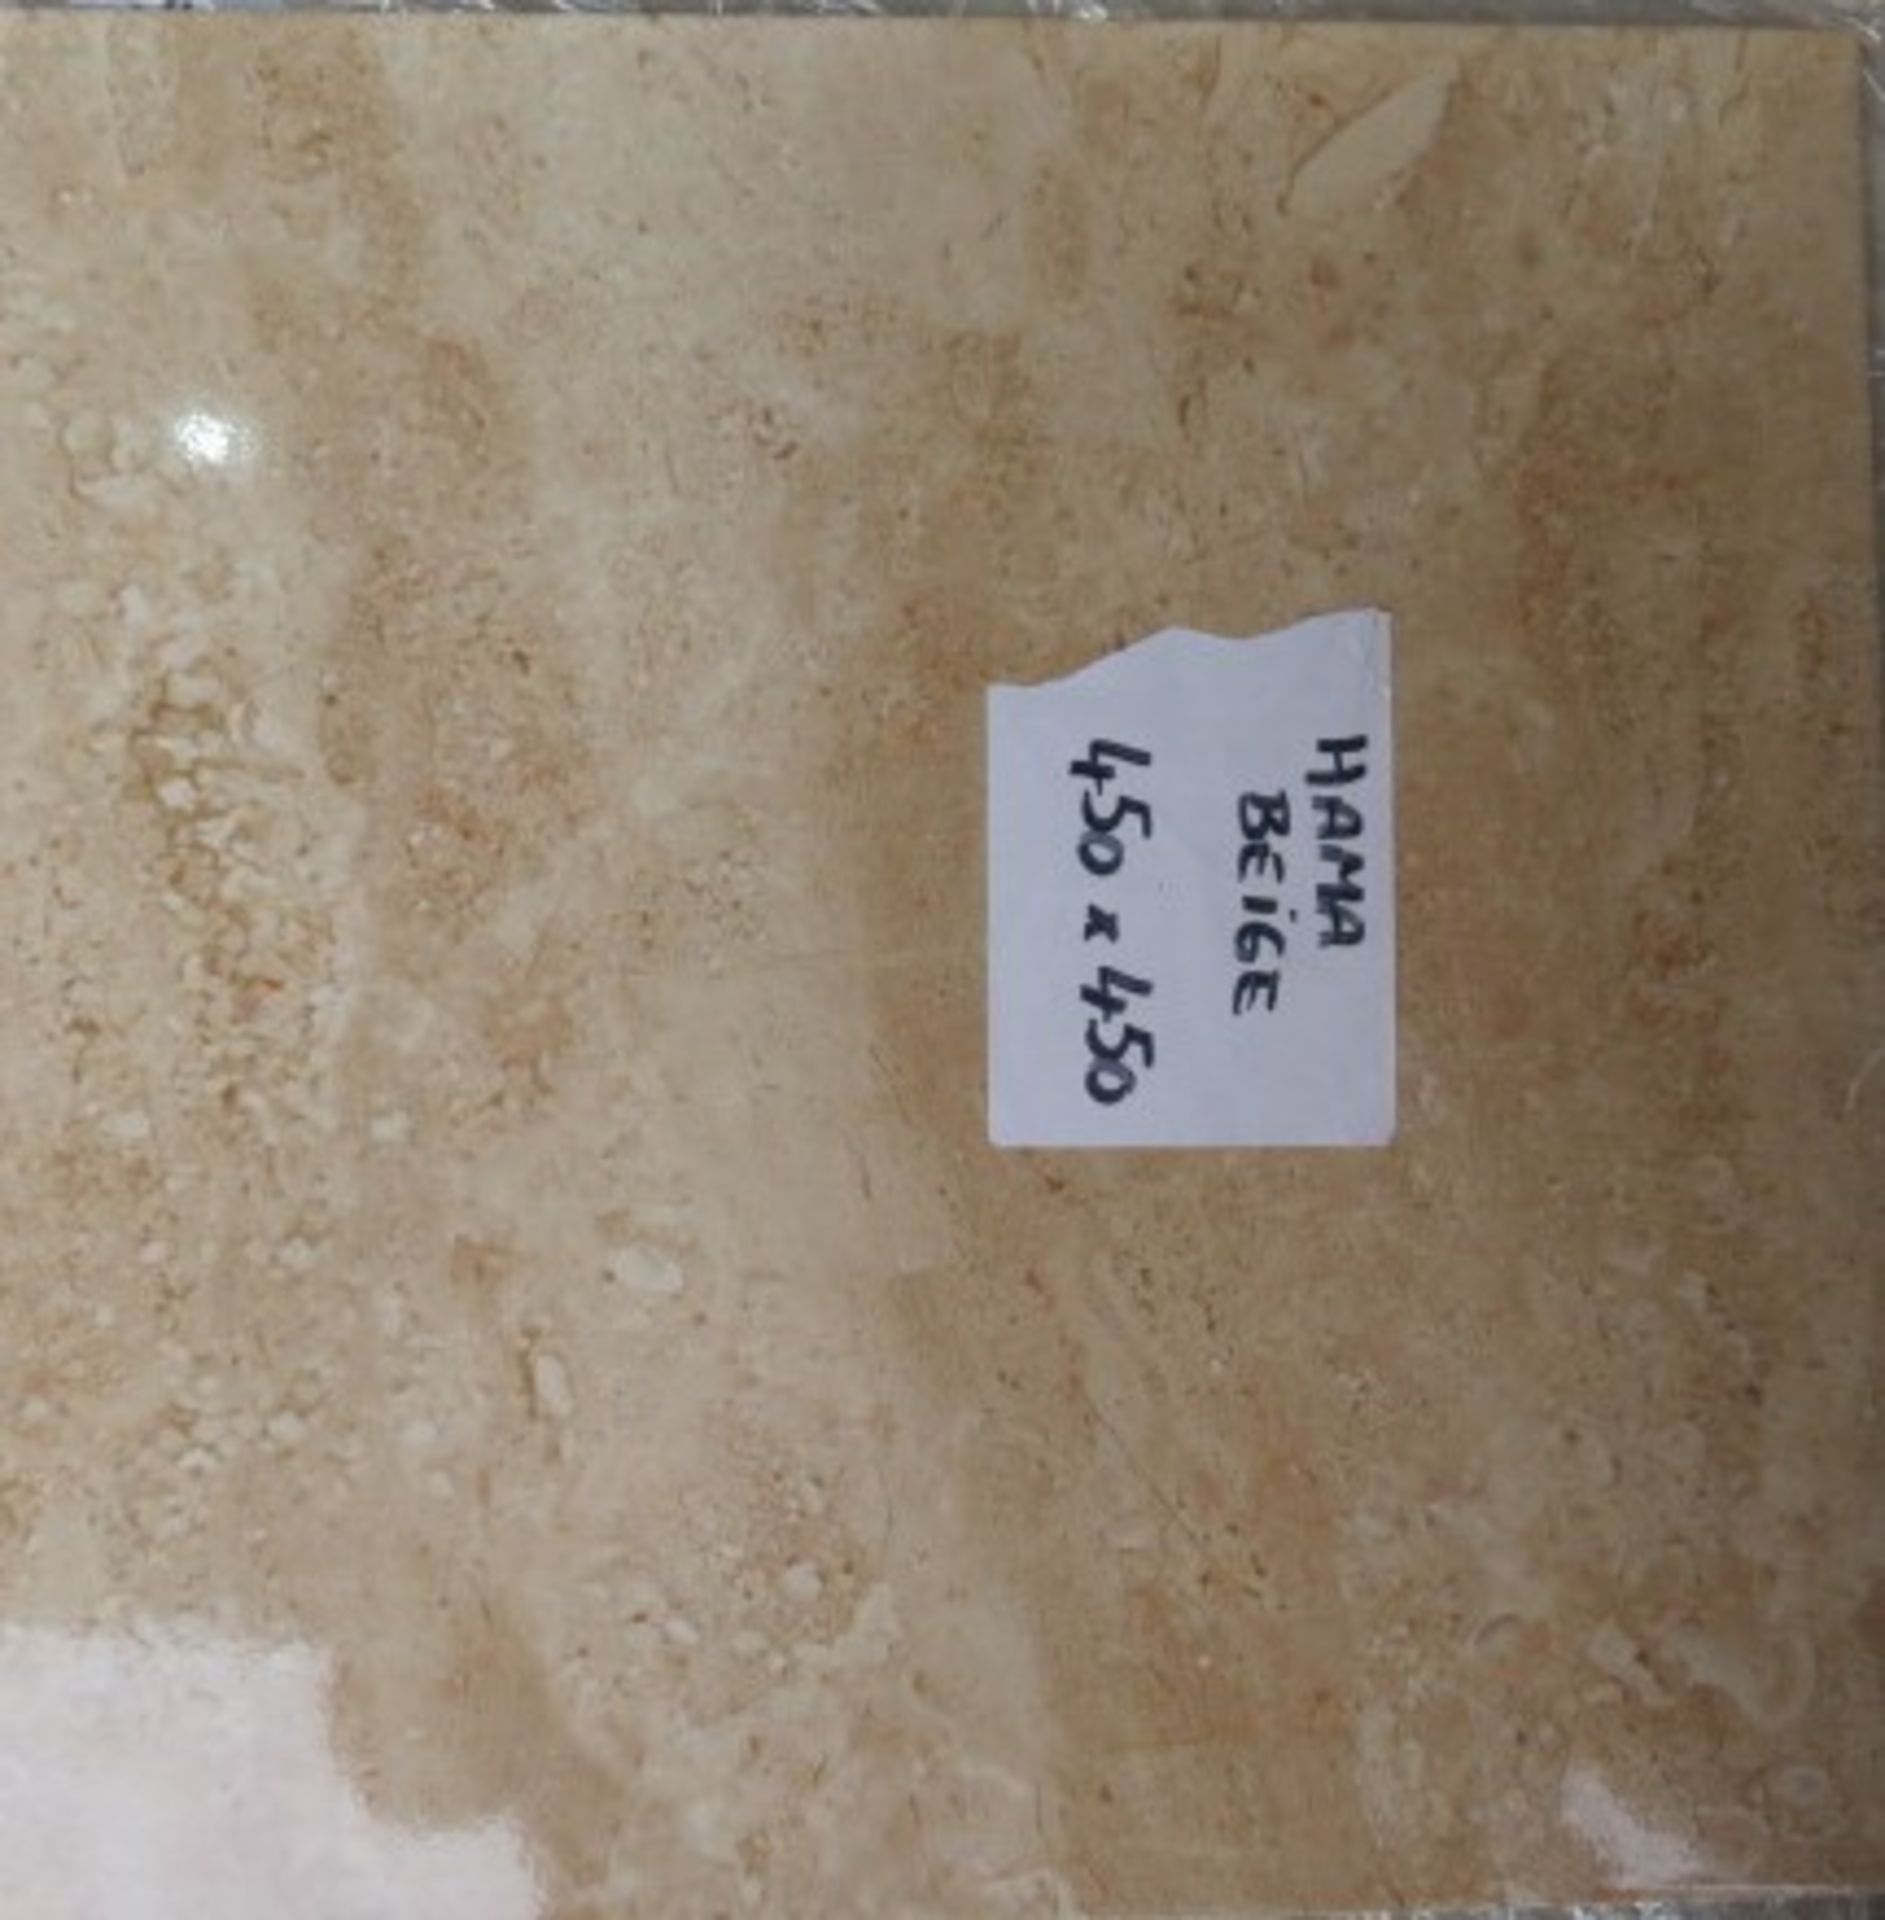 NEW 8.52 Square Meters of Hama Beige Wall and Floor Tiles. 450x450mm per tile, 10mm thick. 1.... - Image 2 of 4